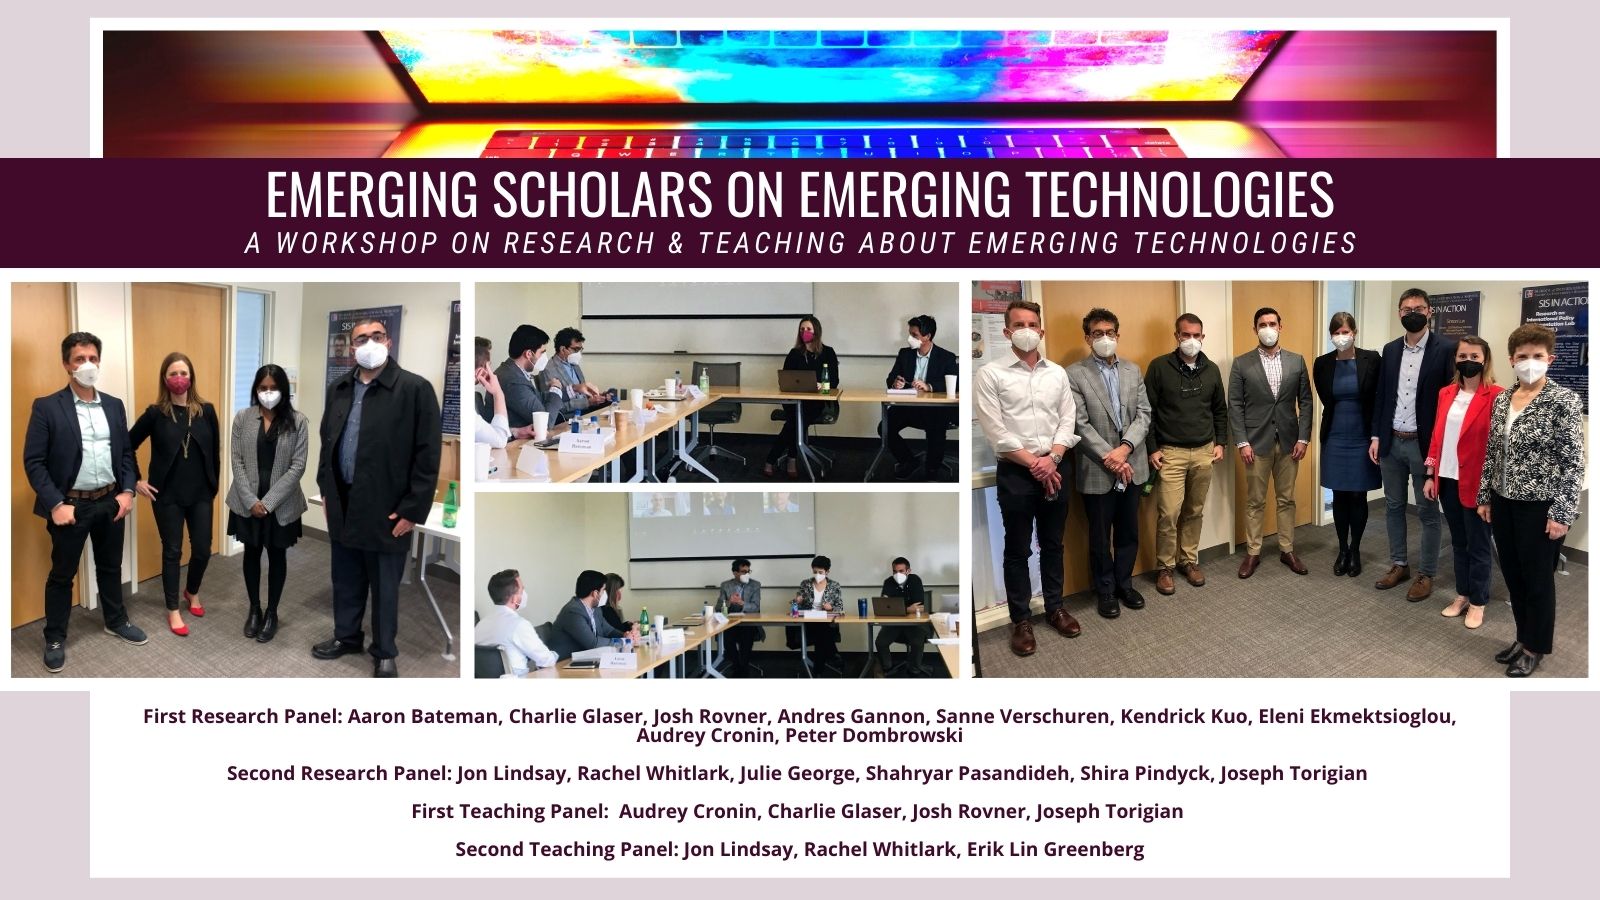 Images of participants of Emerging Technology workshop